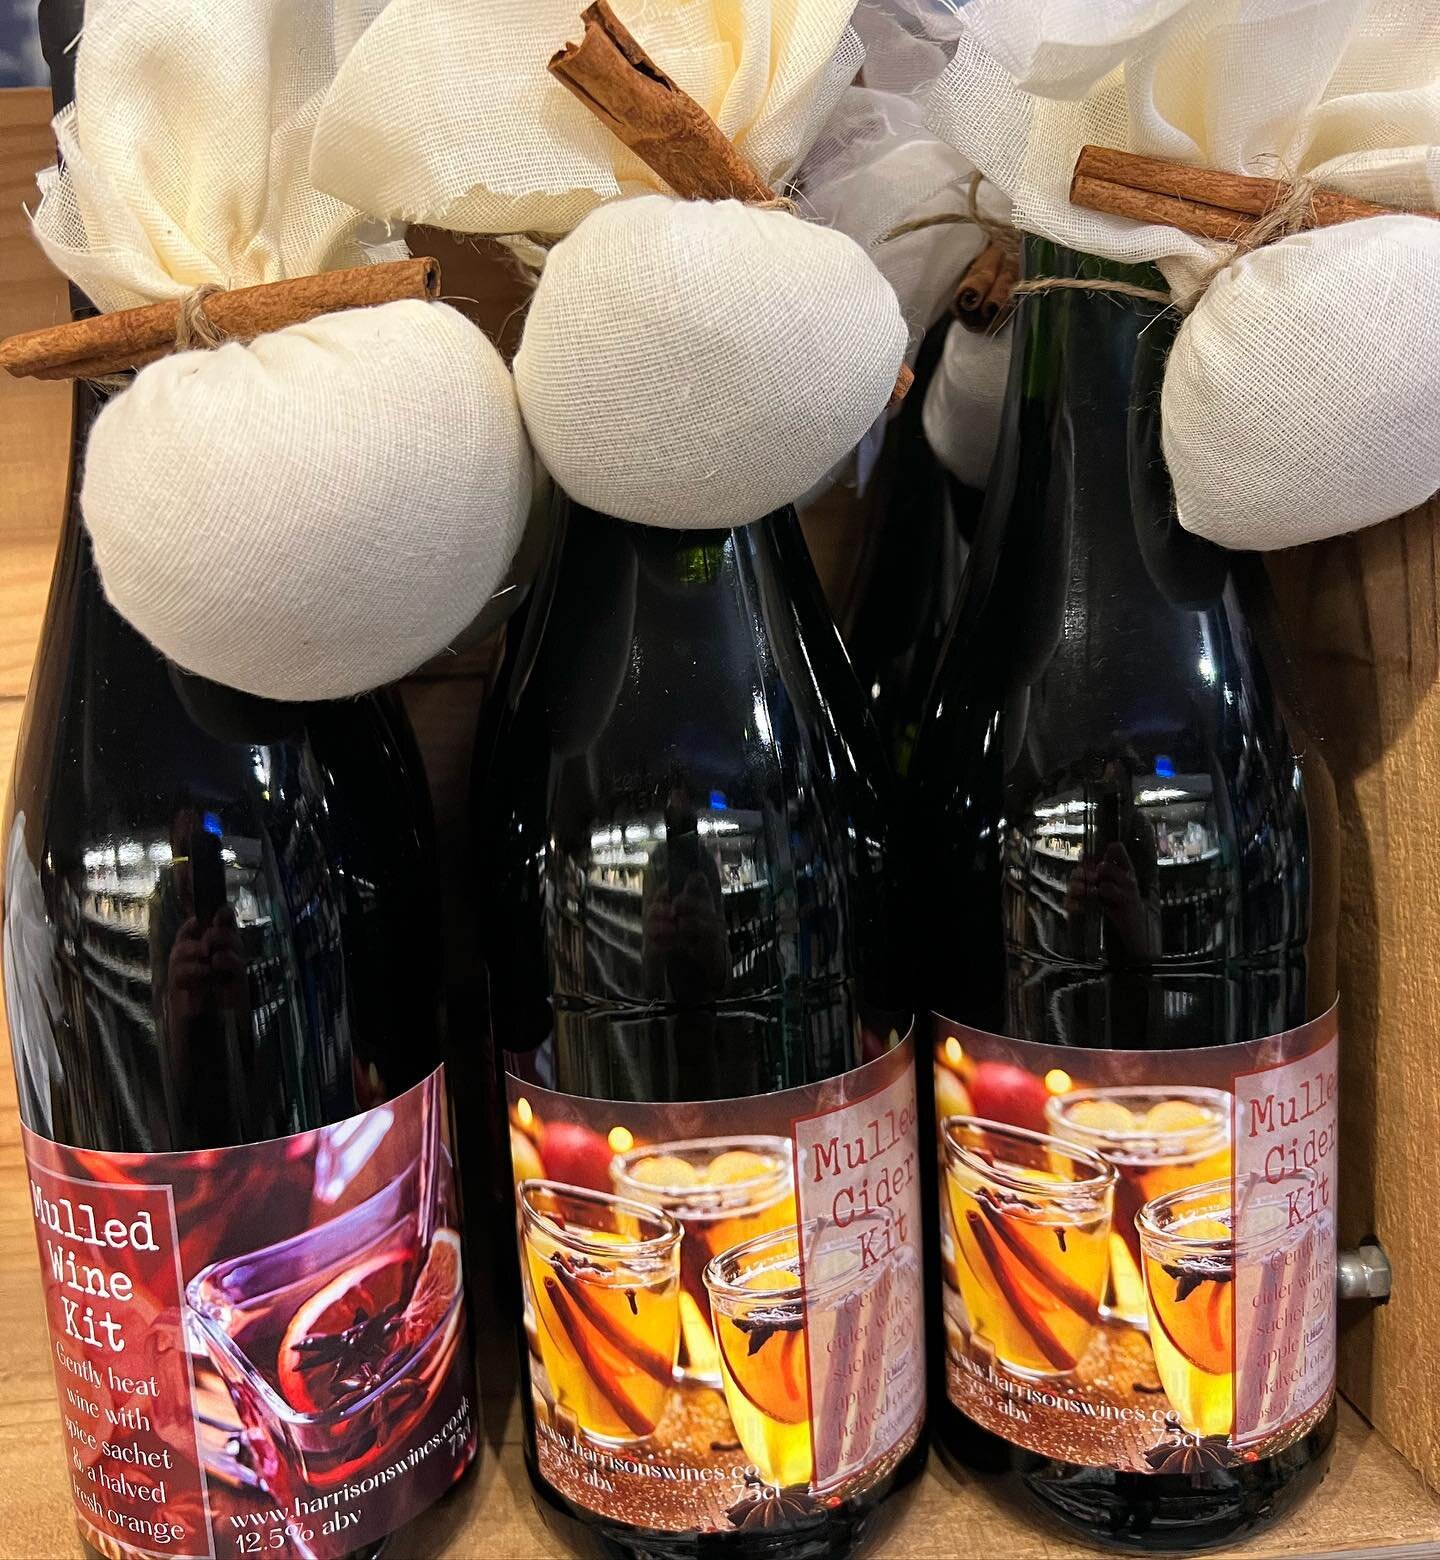 Our handmade mulled wine and mulled cider kits are now available in store and to pre-order.

#mulledwine #mulledcider #hotwine #vinchaud #harrisonsdeli #pitshanger